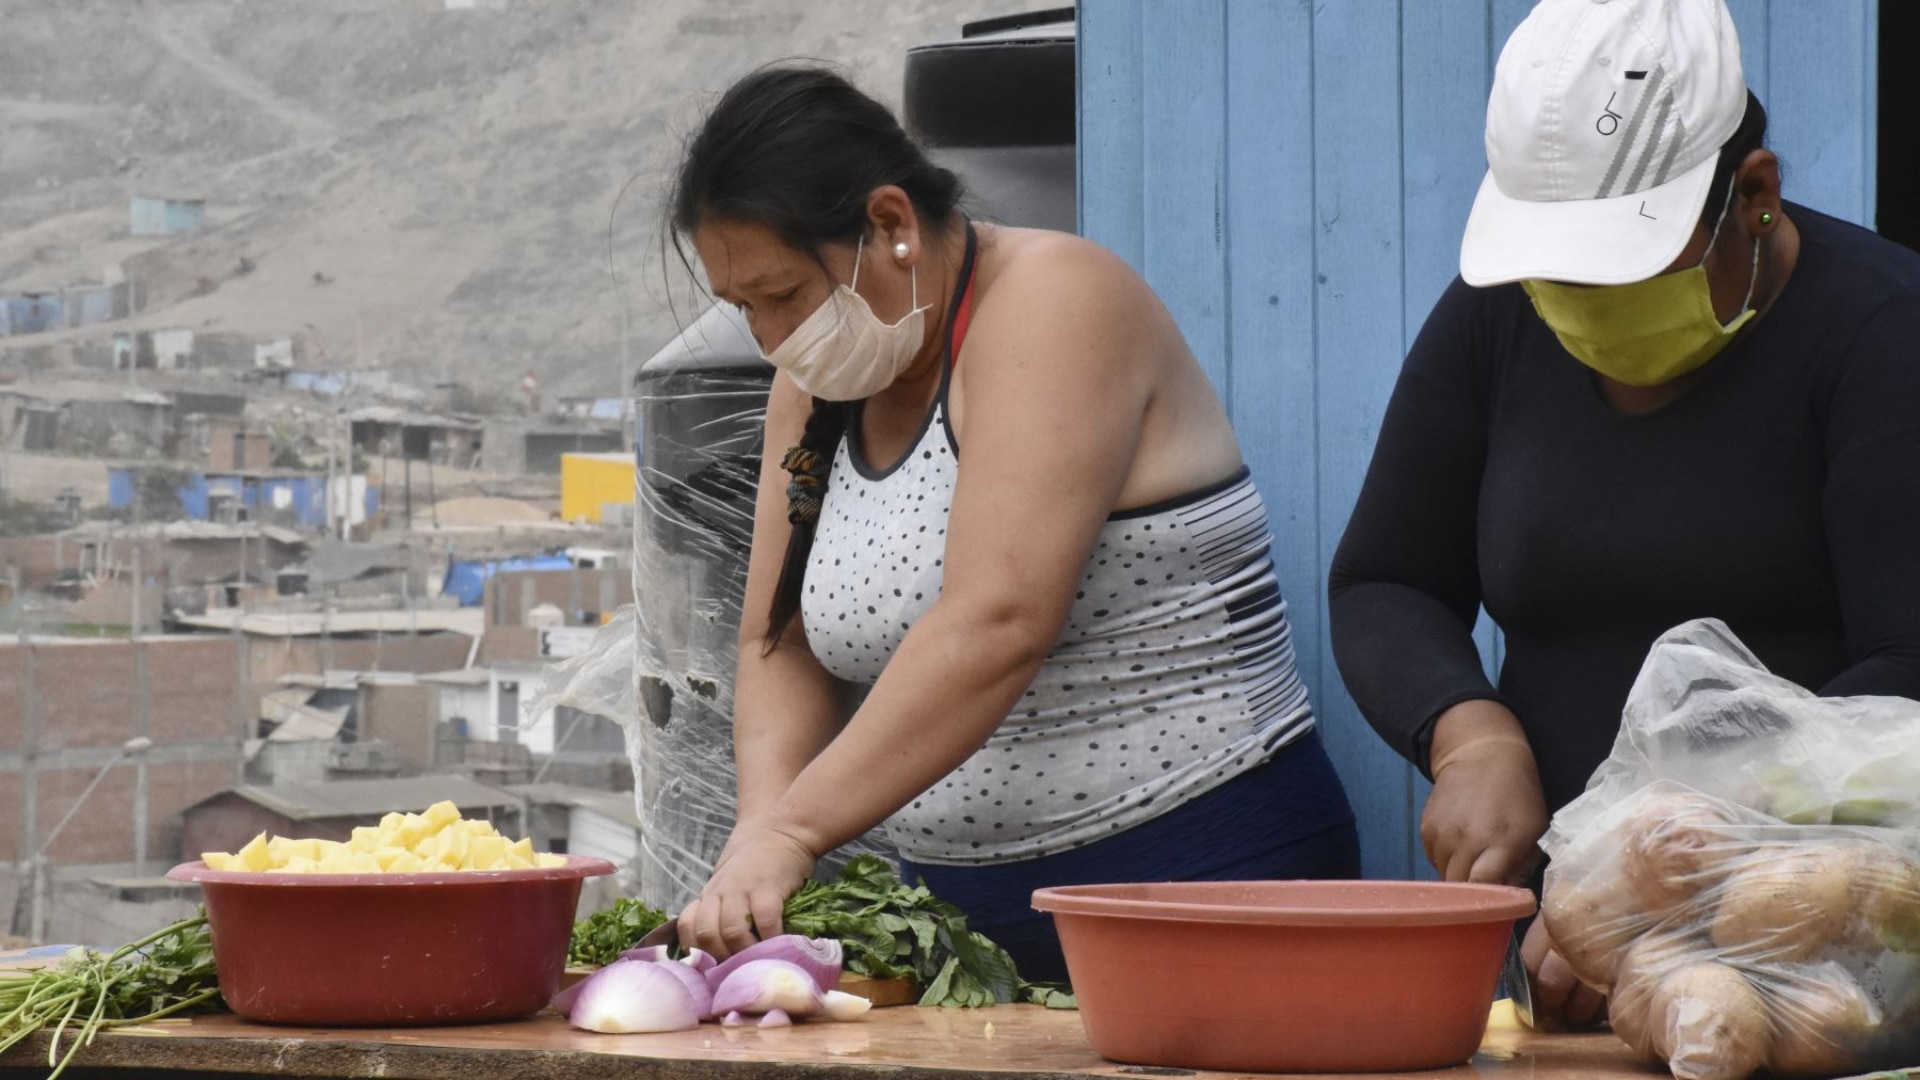 Moderate food insecurity reaches 50% in Peru, revealed the Minister of Development and Social Inclusion|Andina